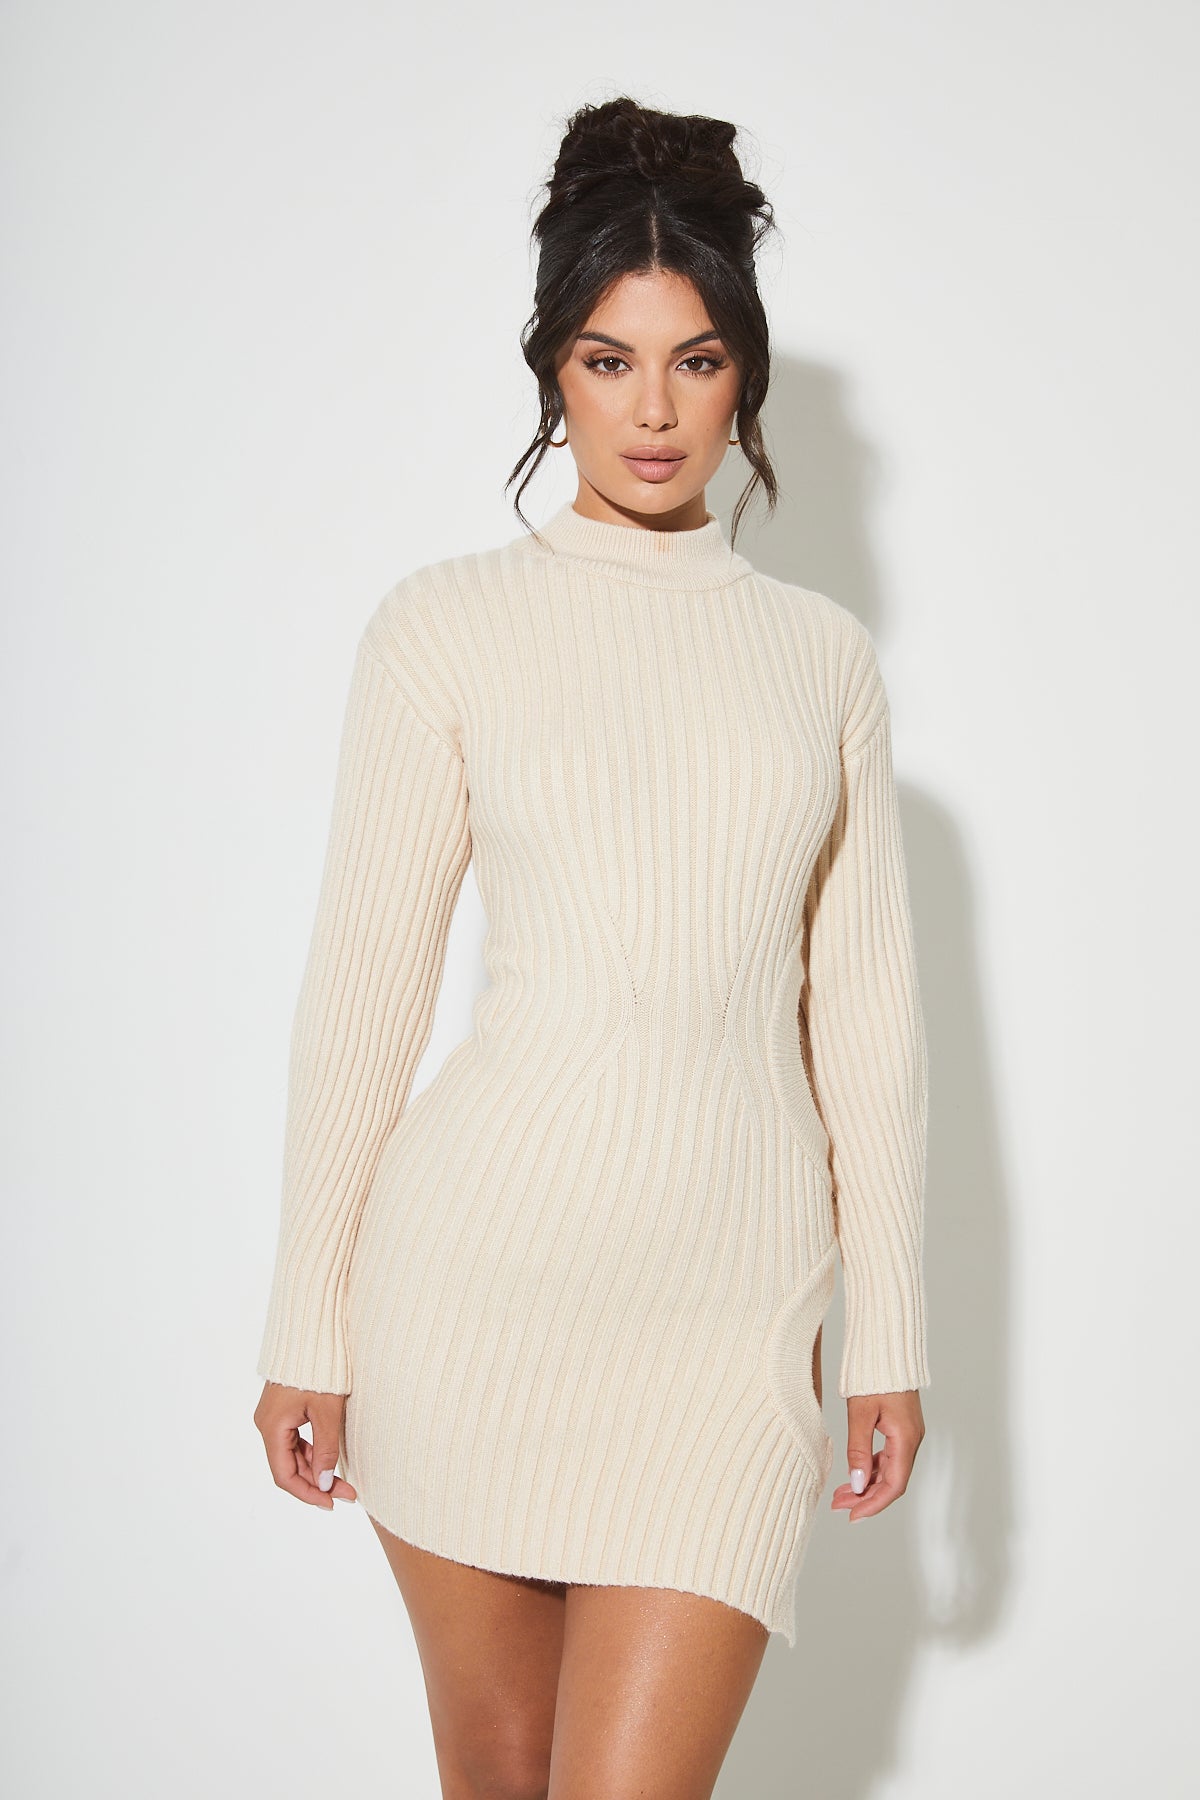 SADIE Cream Ribbed Knit Cut Out Dress